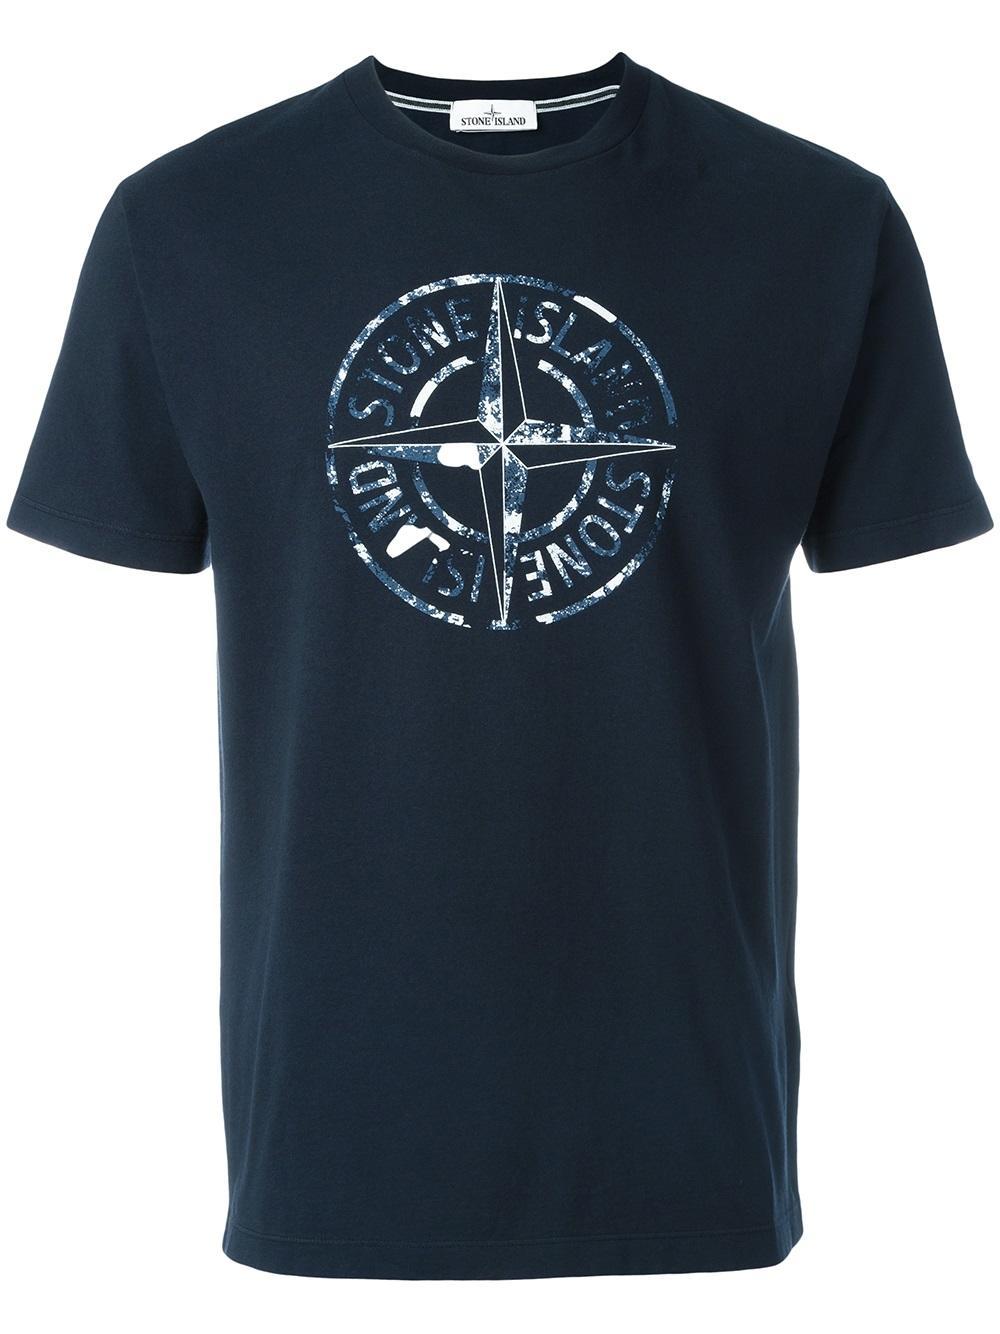 Lyst - Stone Island Compass Print Cotton T-shirt in Blue for Men